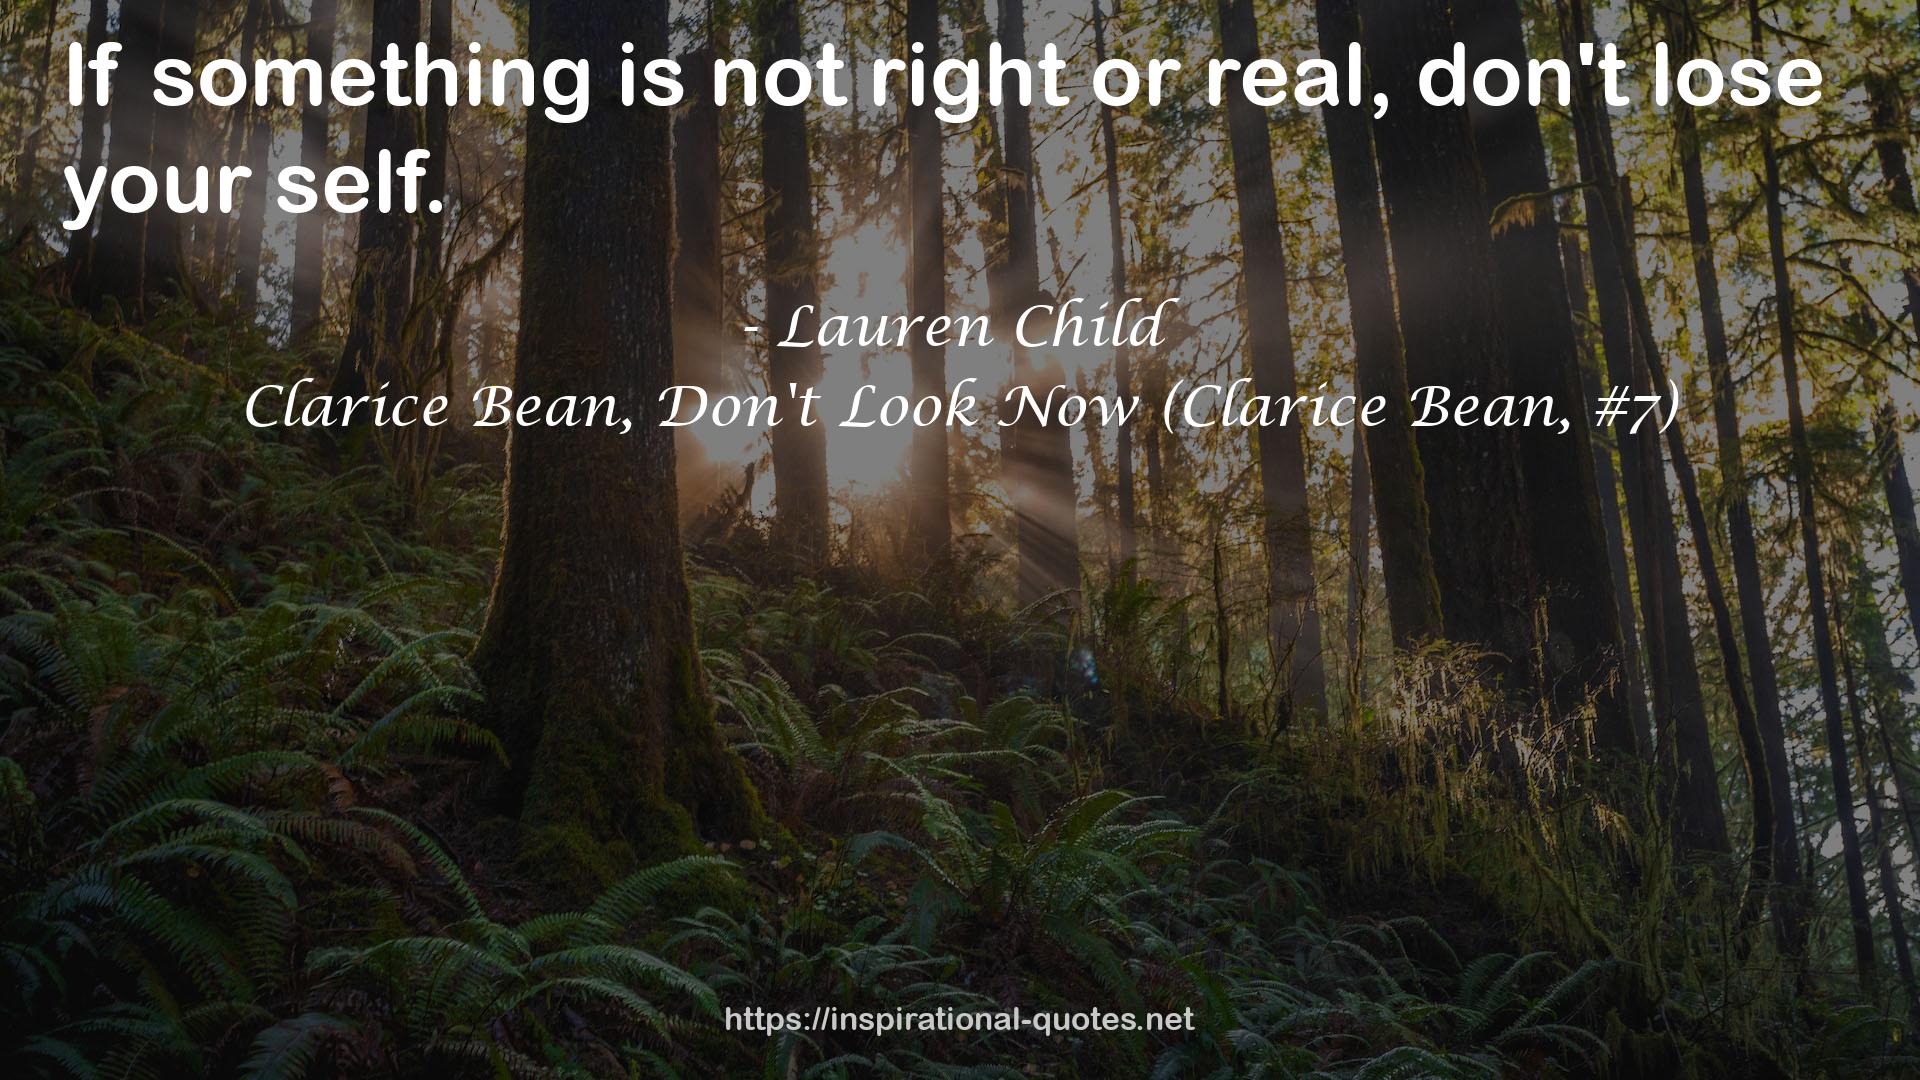 Clarice Bean, Don't Look Now (Clarice Bean, #7) QUOTES